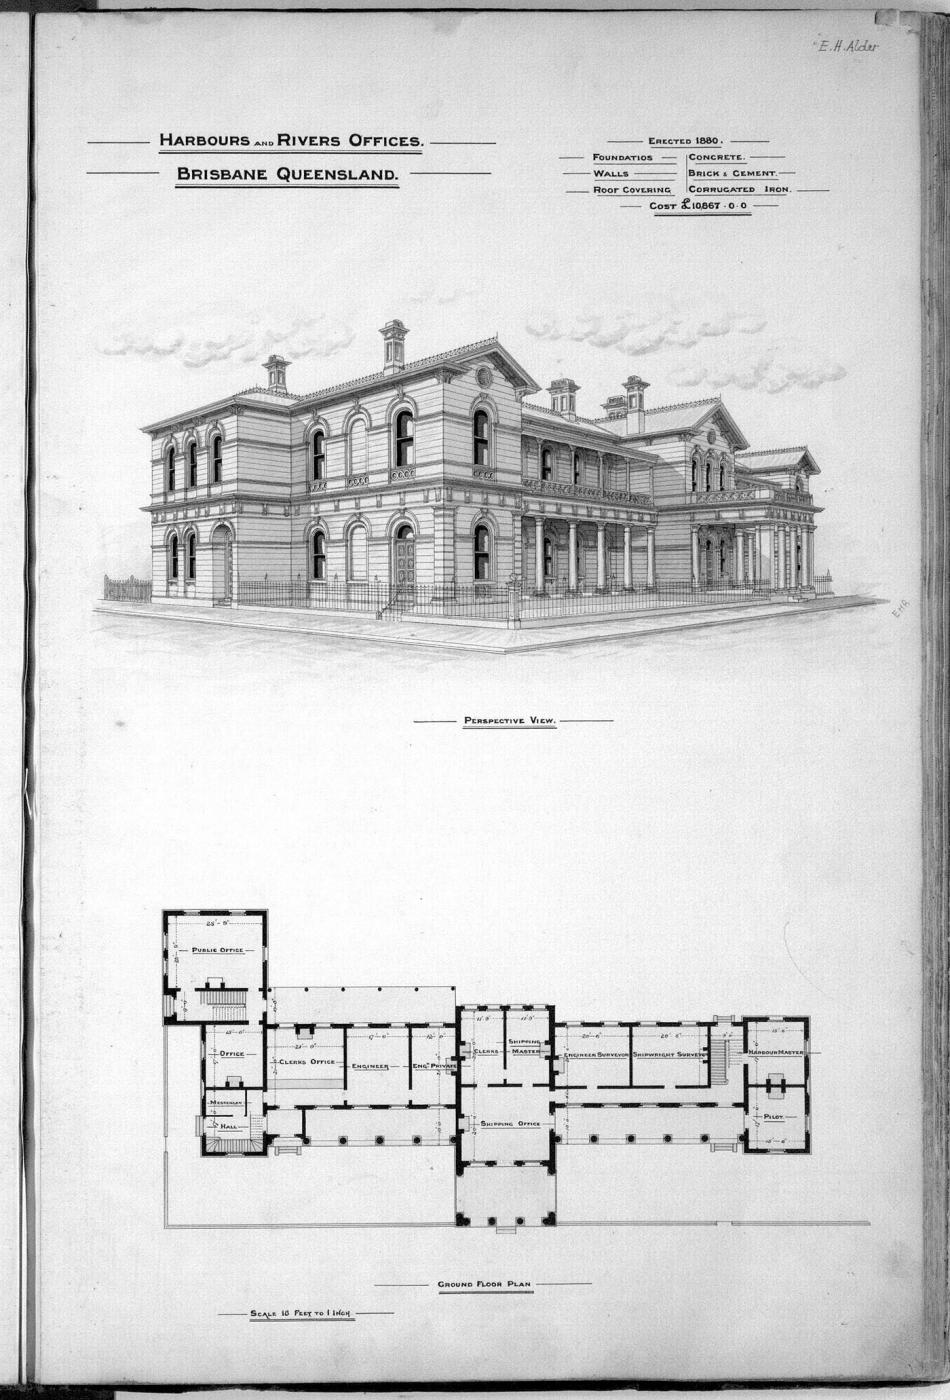 Architectural plan of the Harbours and Rivers Offices, Brisbane, 1880